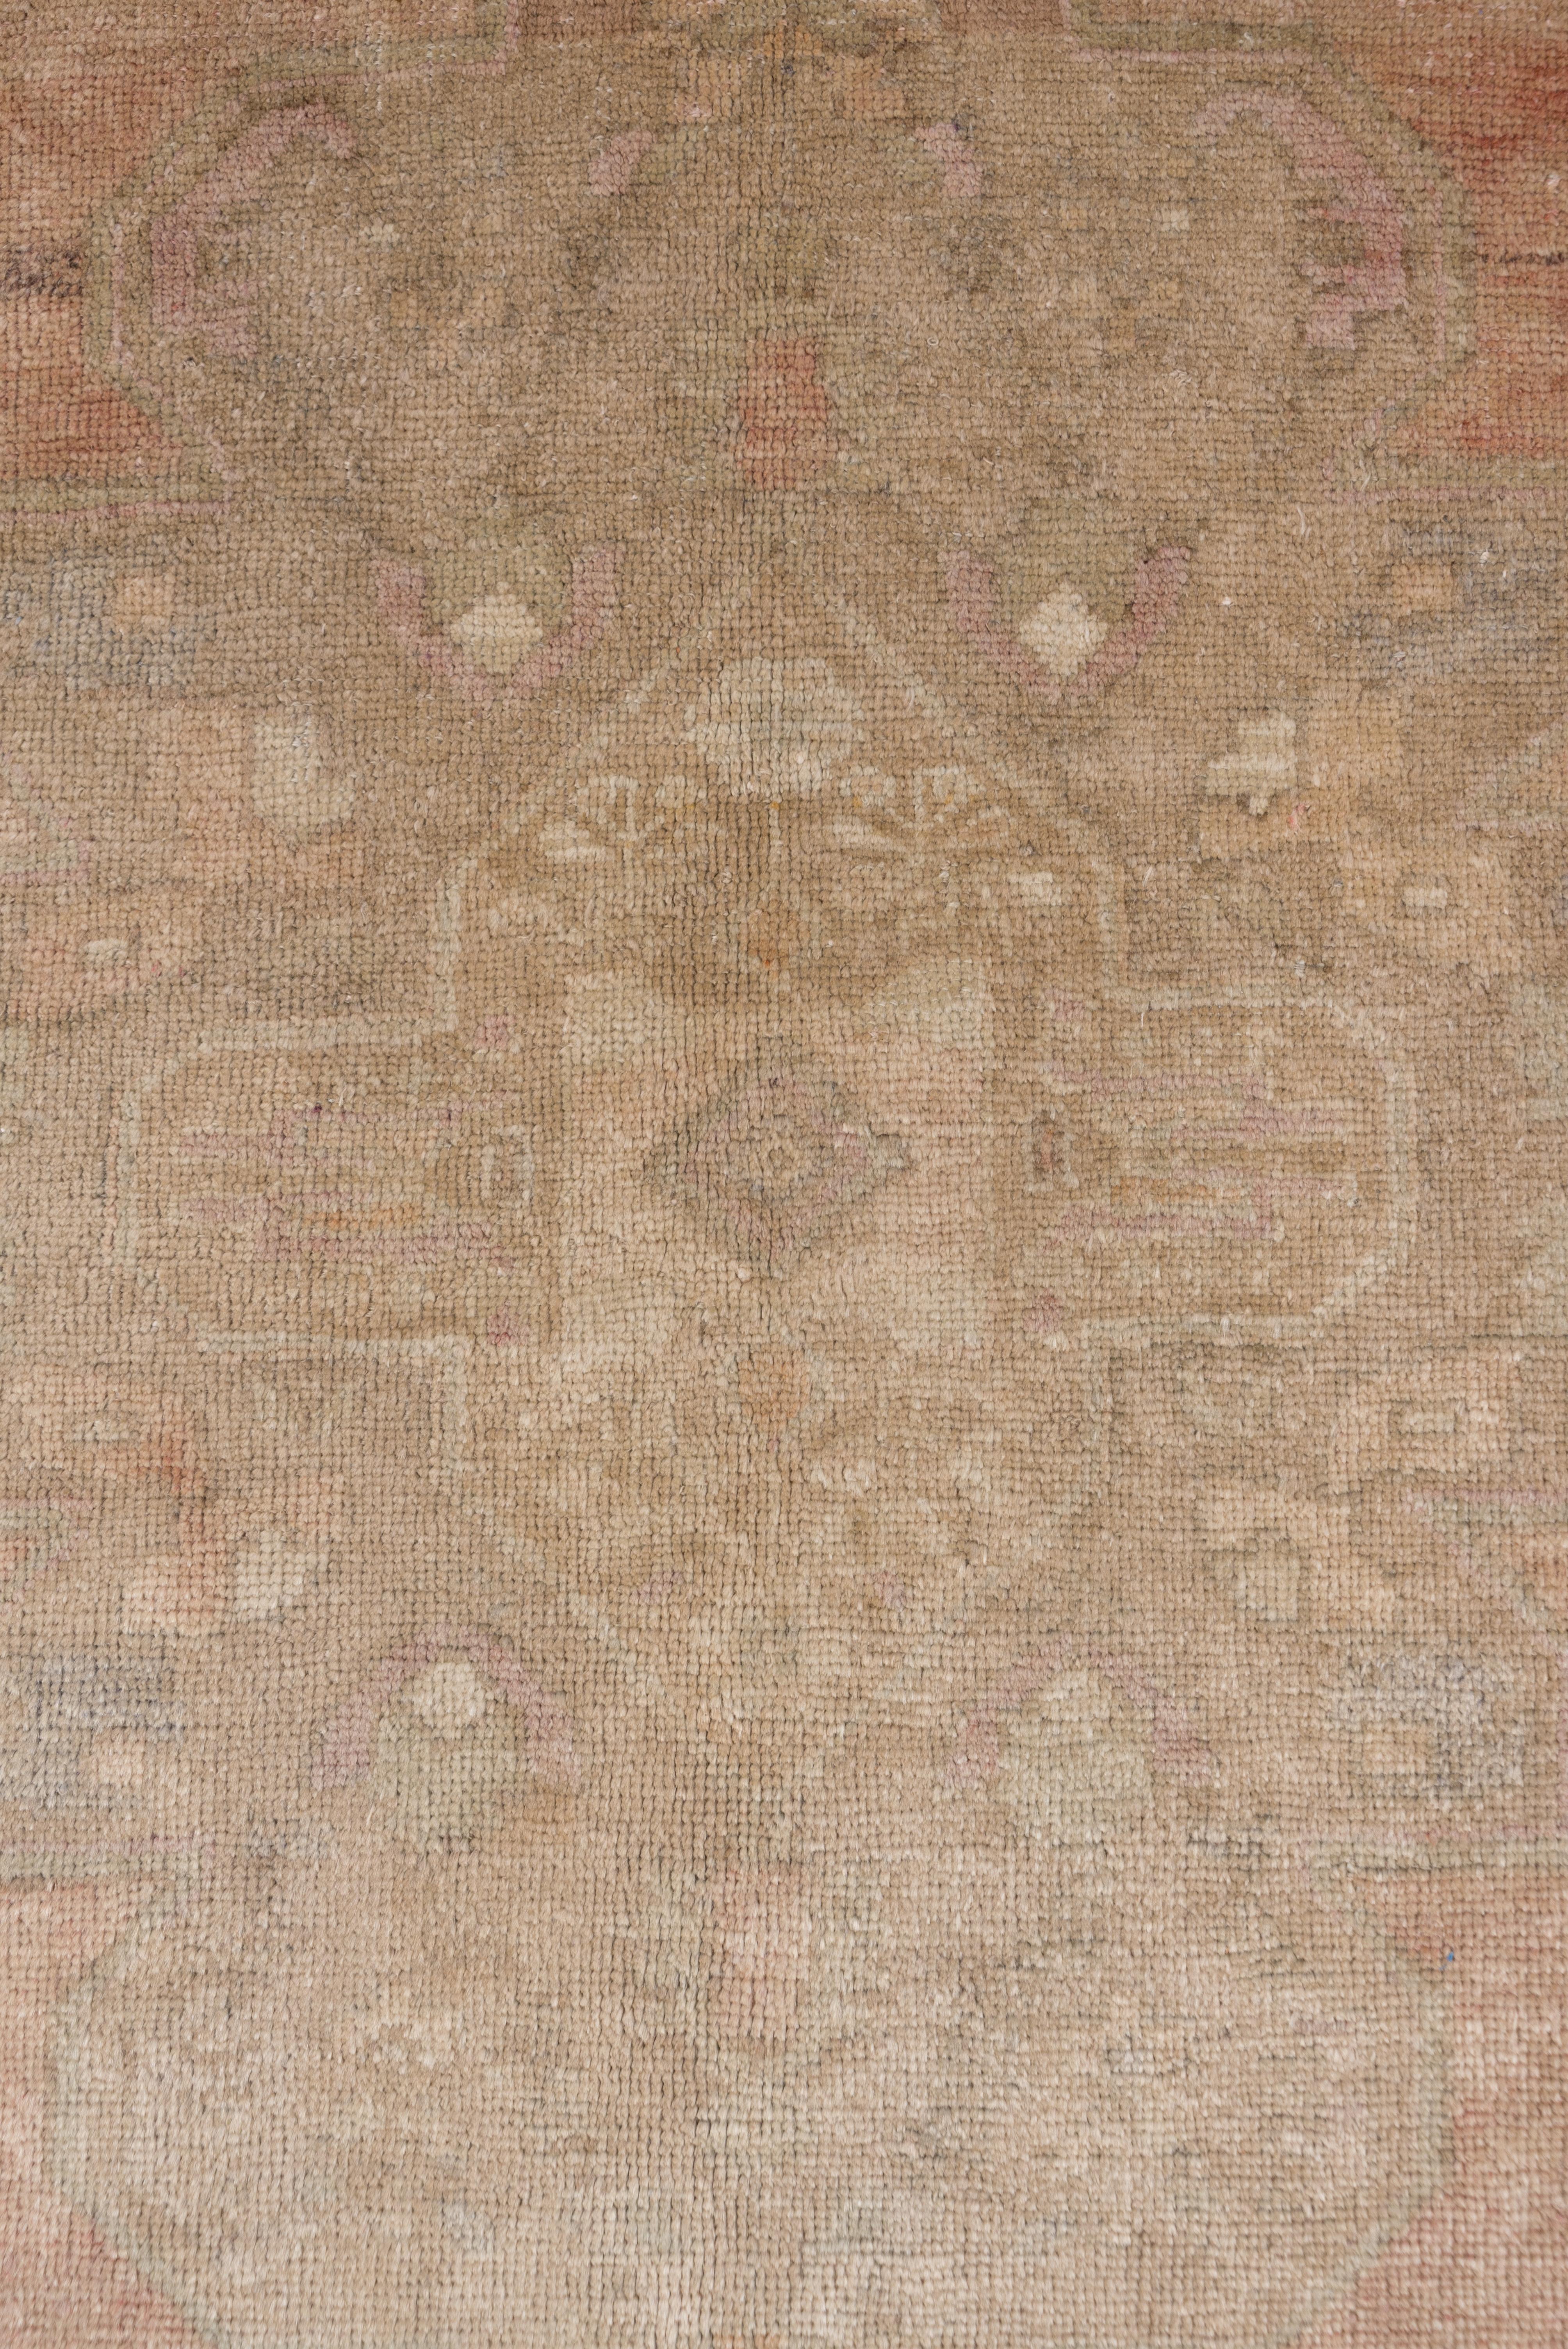 Turkish Oushak Rug, Muted Colors, Silky Pile